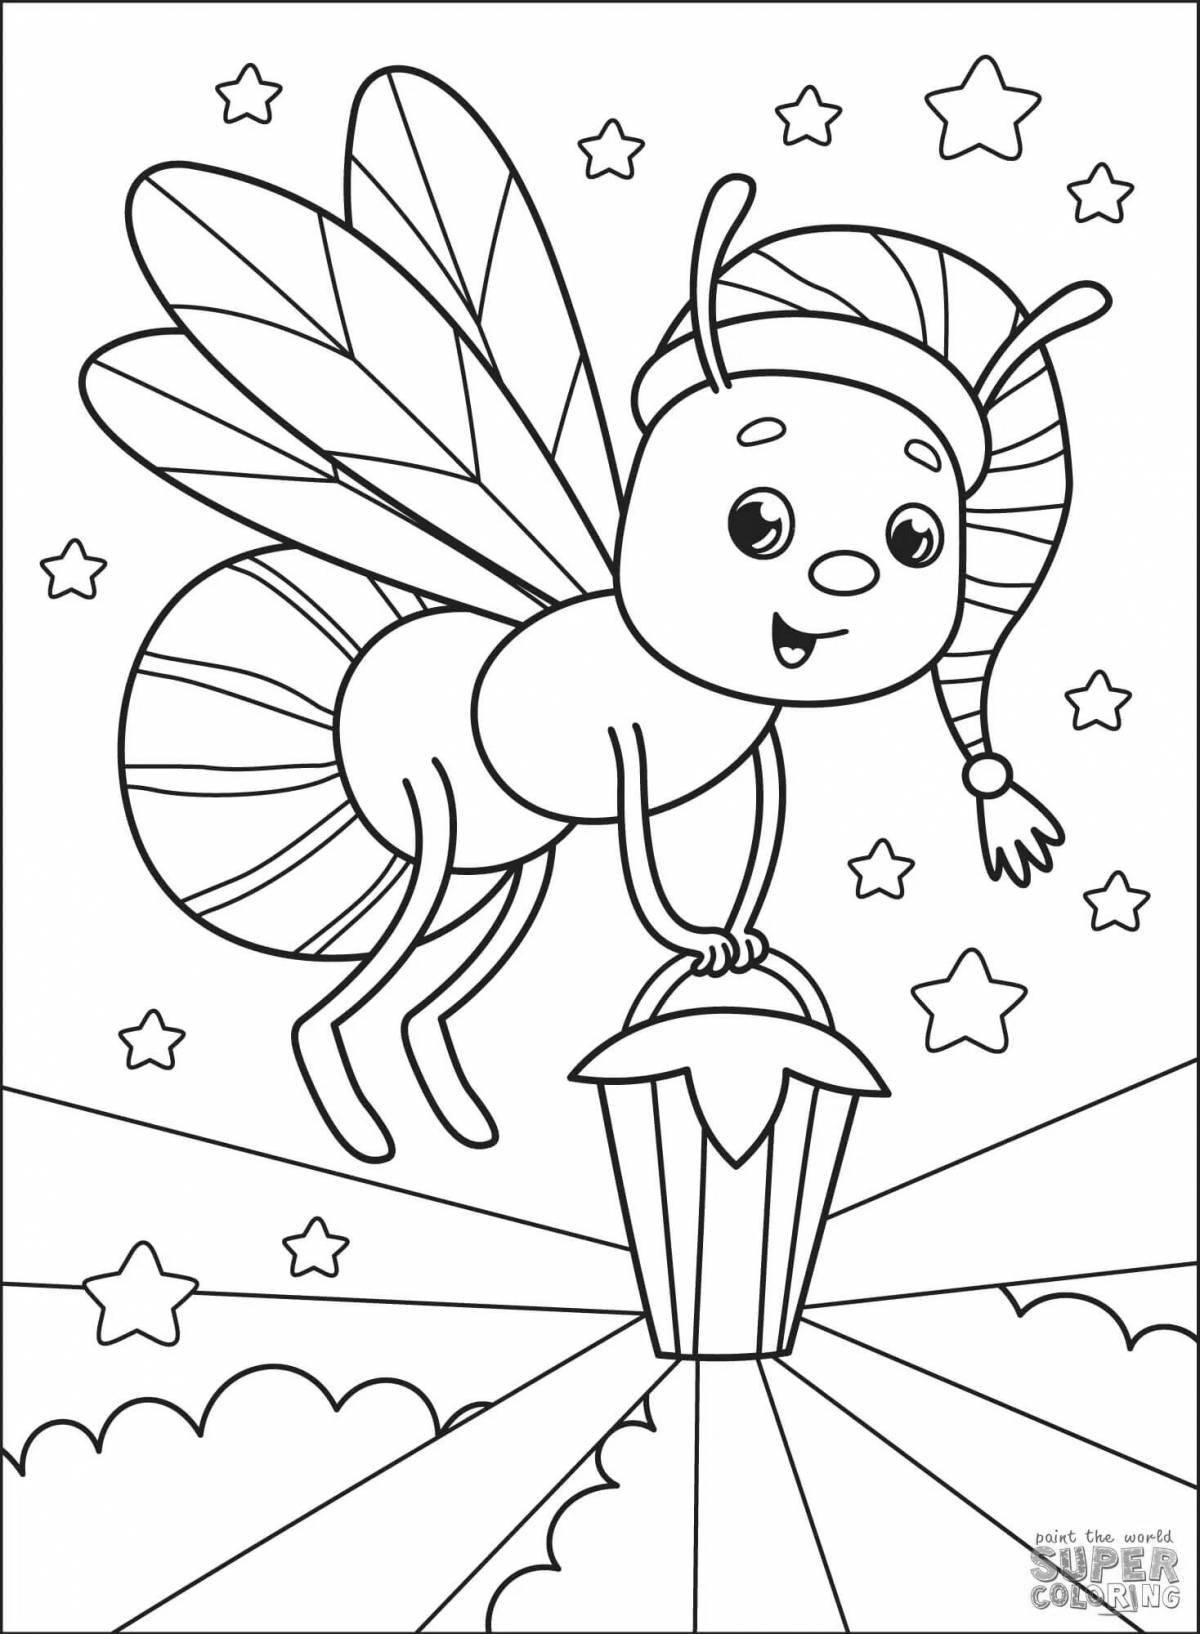 Wonderful firefly coloring book